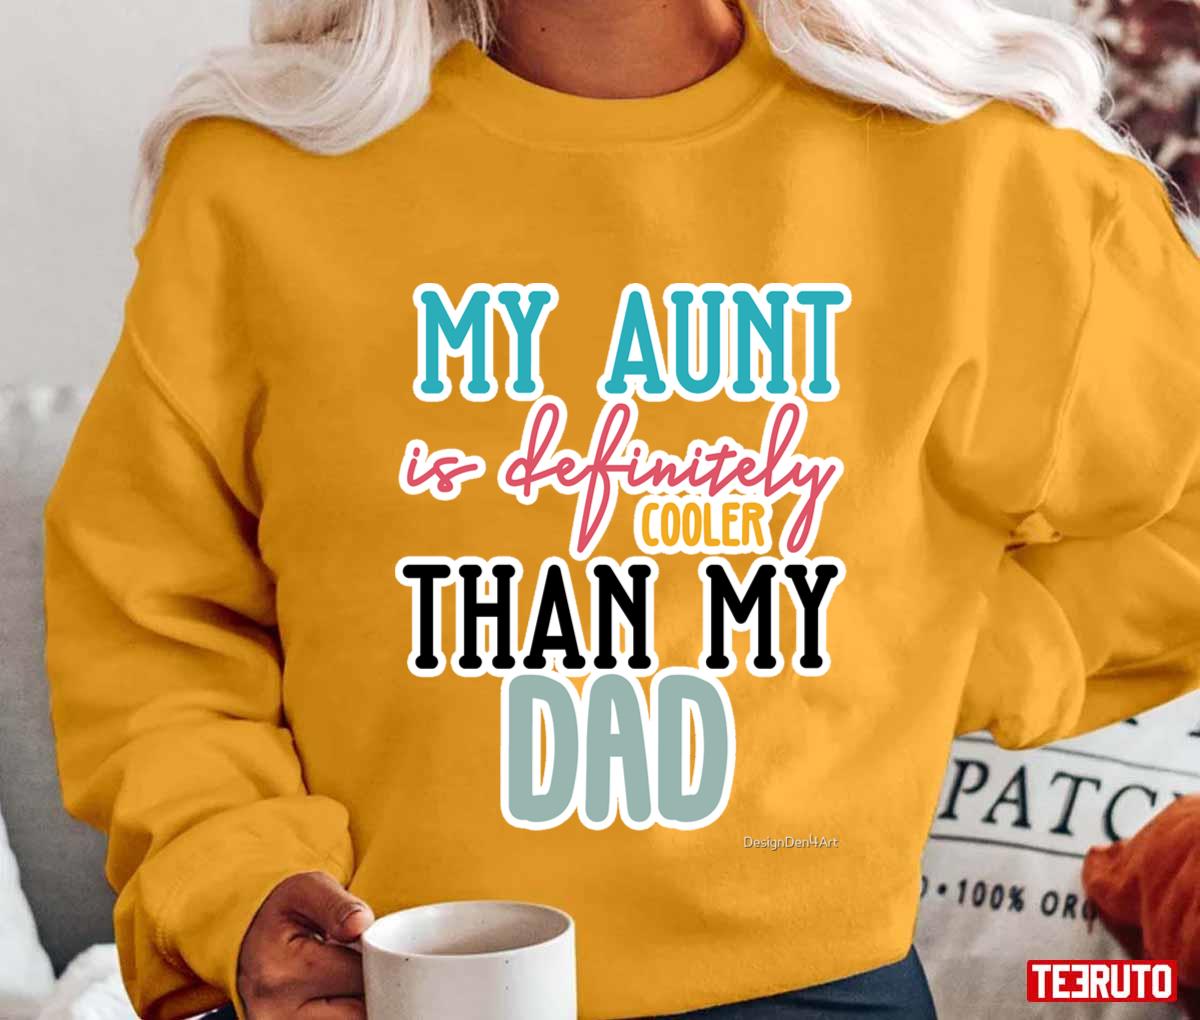 My Aunt Is Definitely Cooler Than My Dad Quote Unisex T-shirt